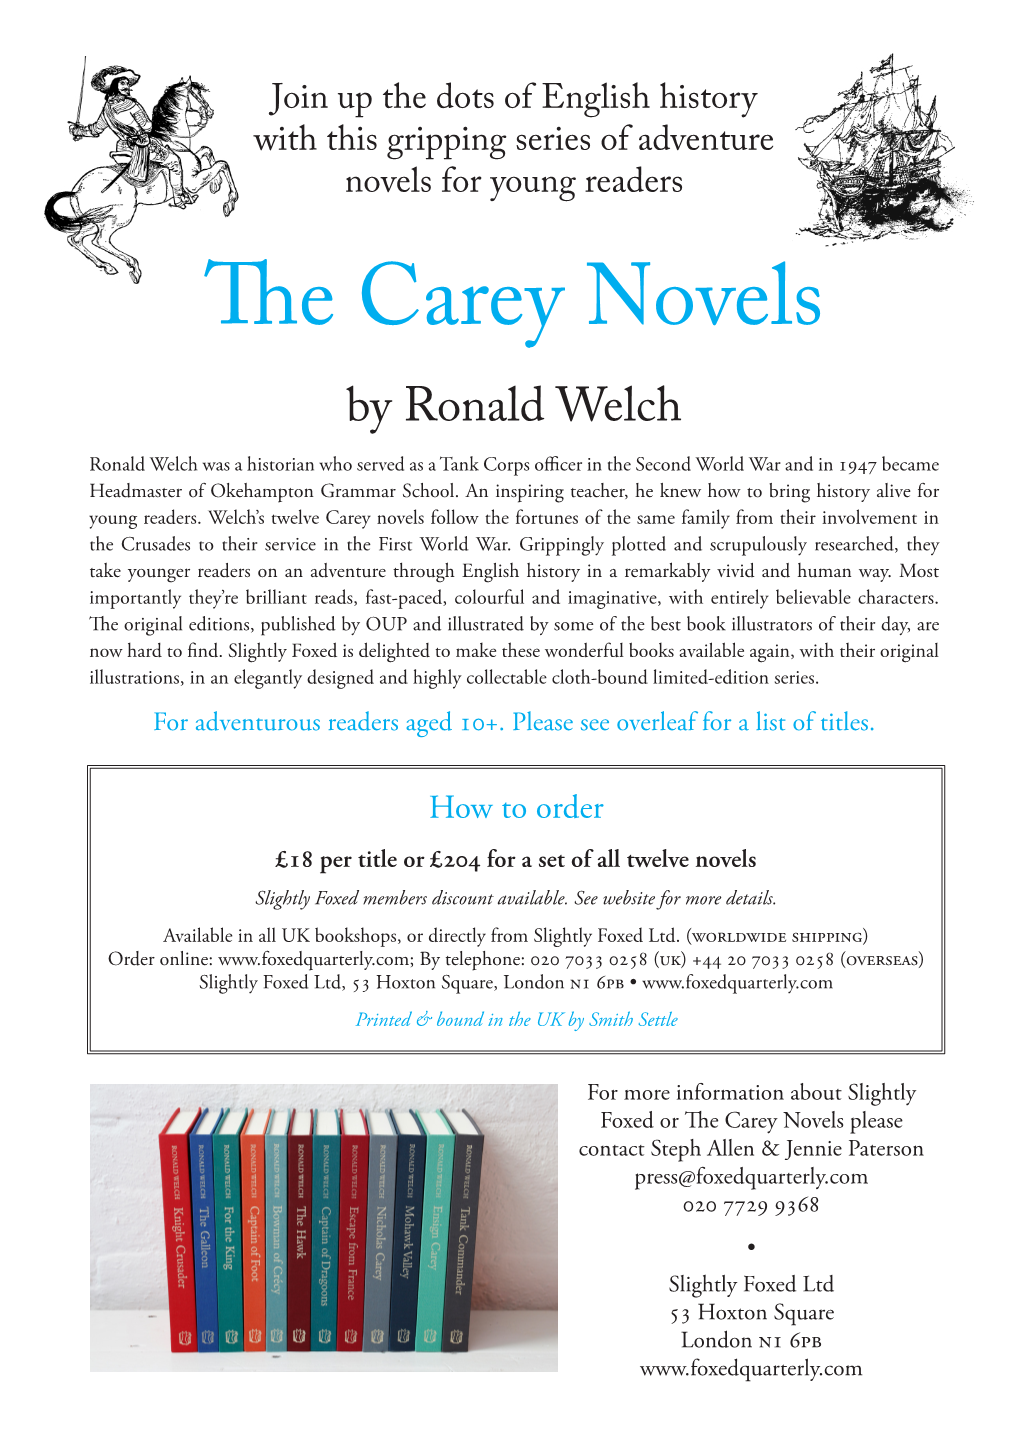 The Carey Novels by Ronald Welch